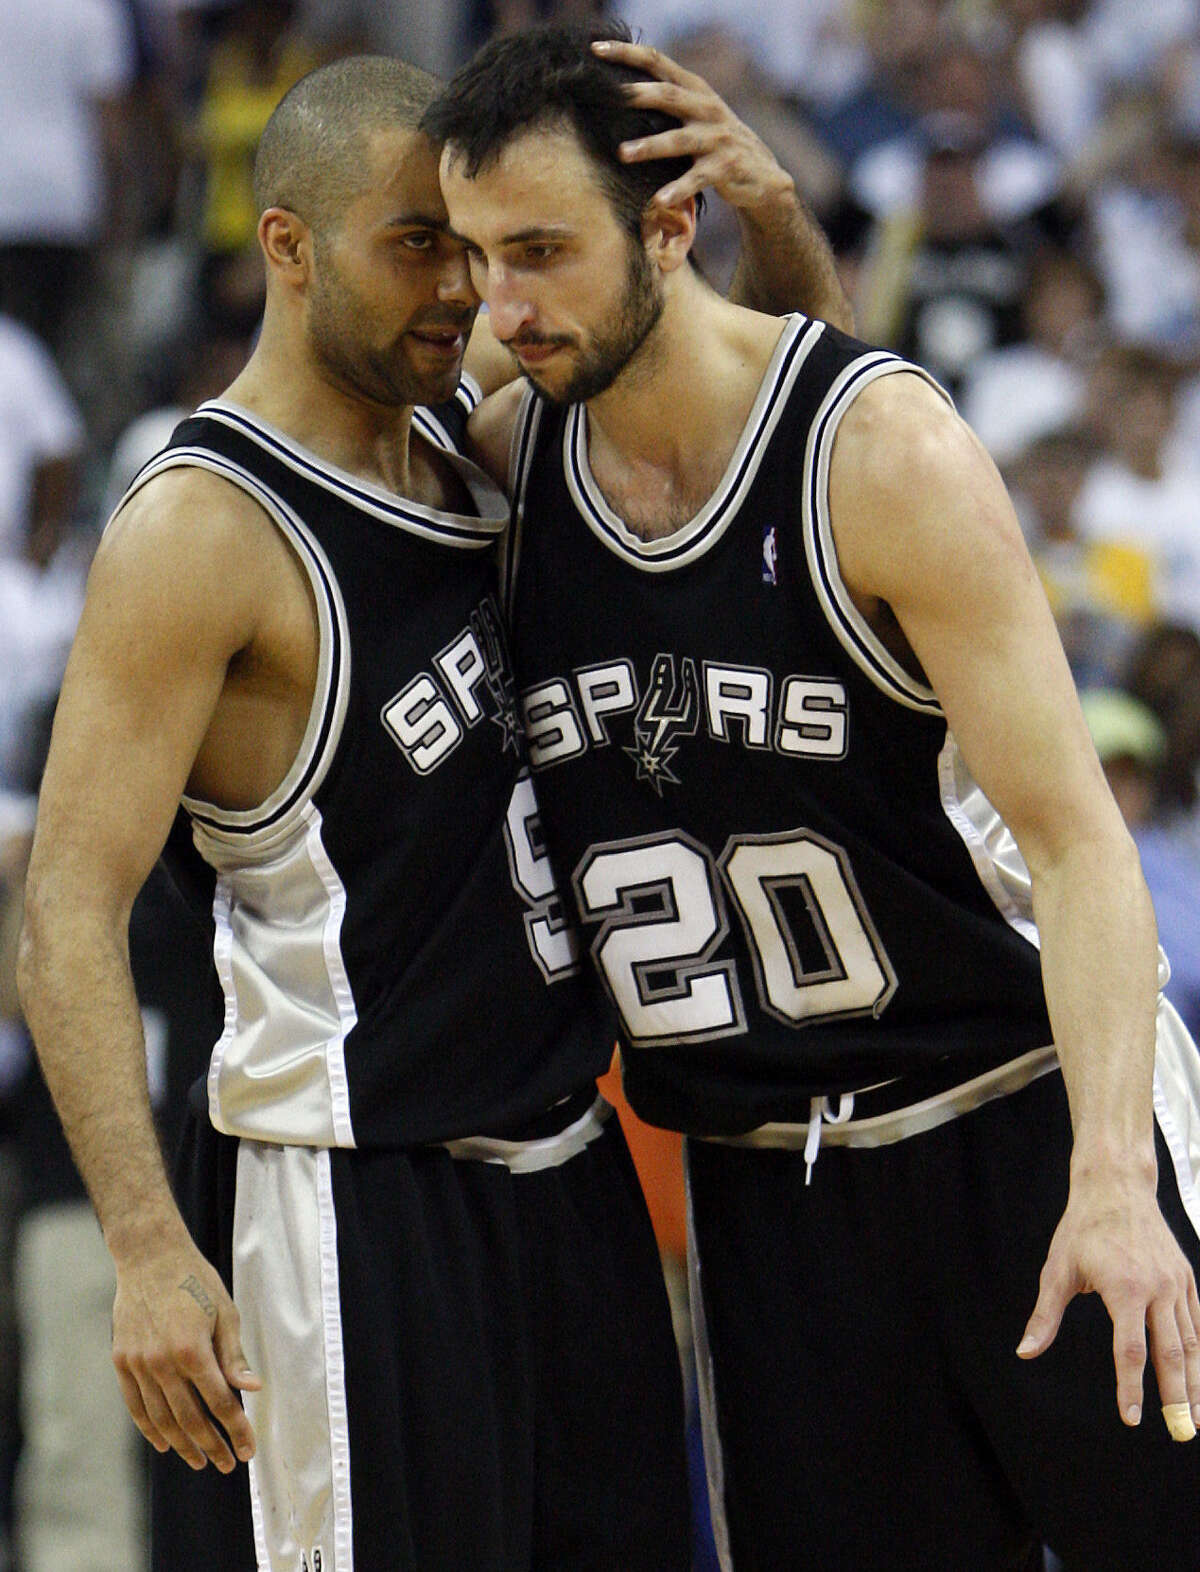 Tony Parker and Manu Ginobili embrace after beating the Hornets in Game 7 in 2008.